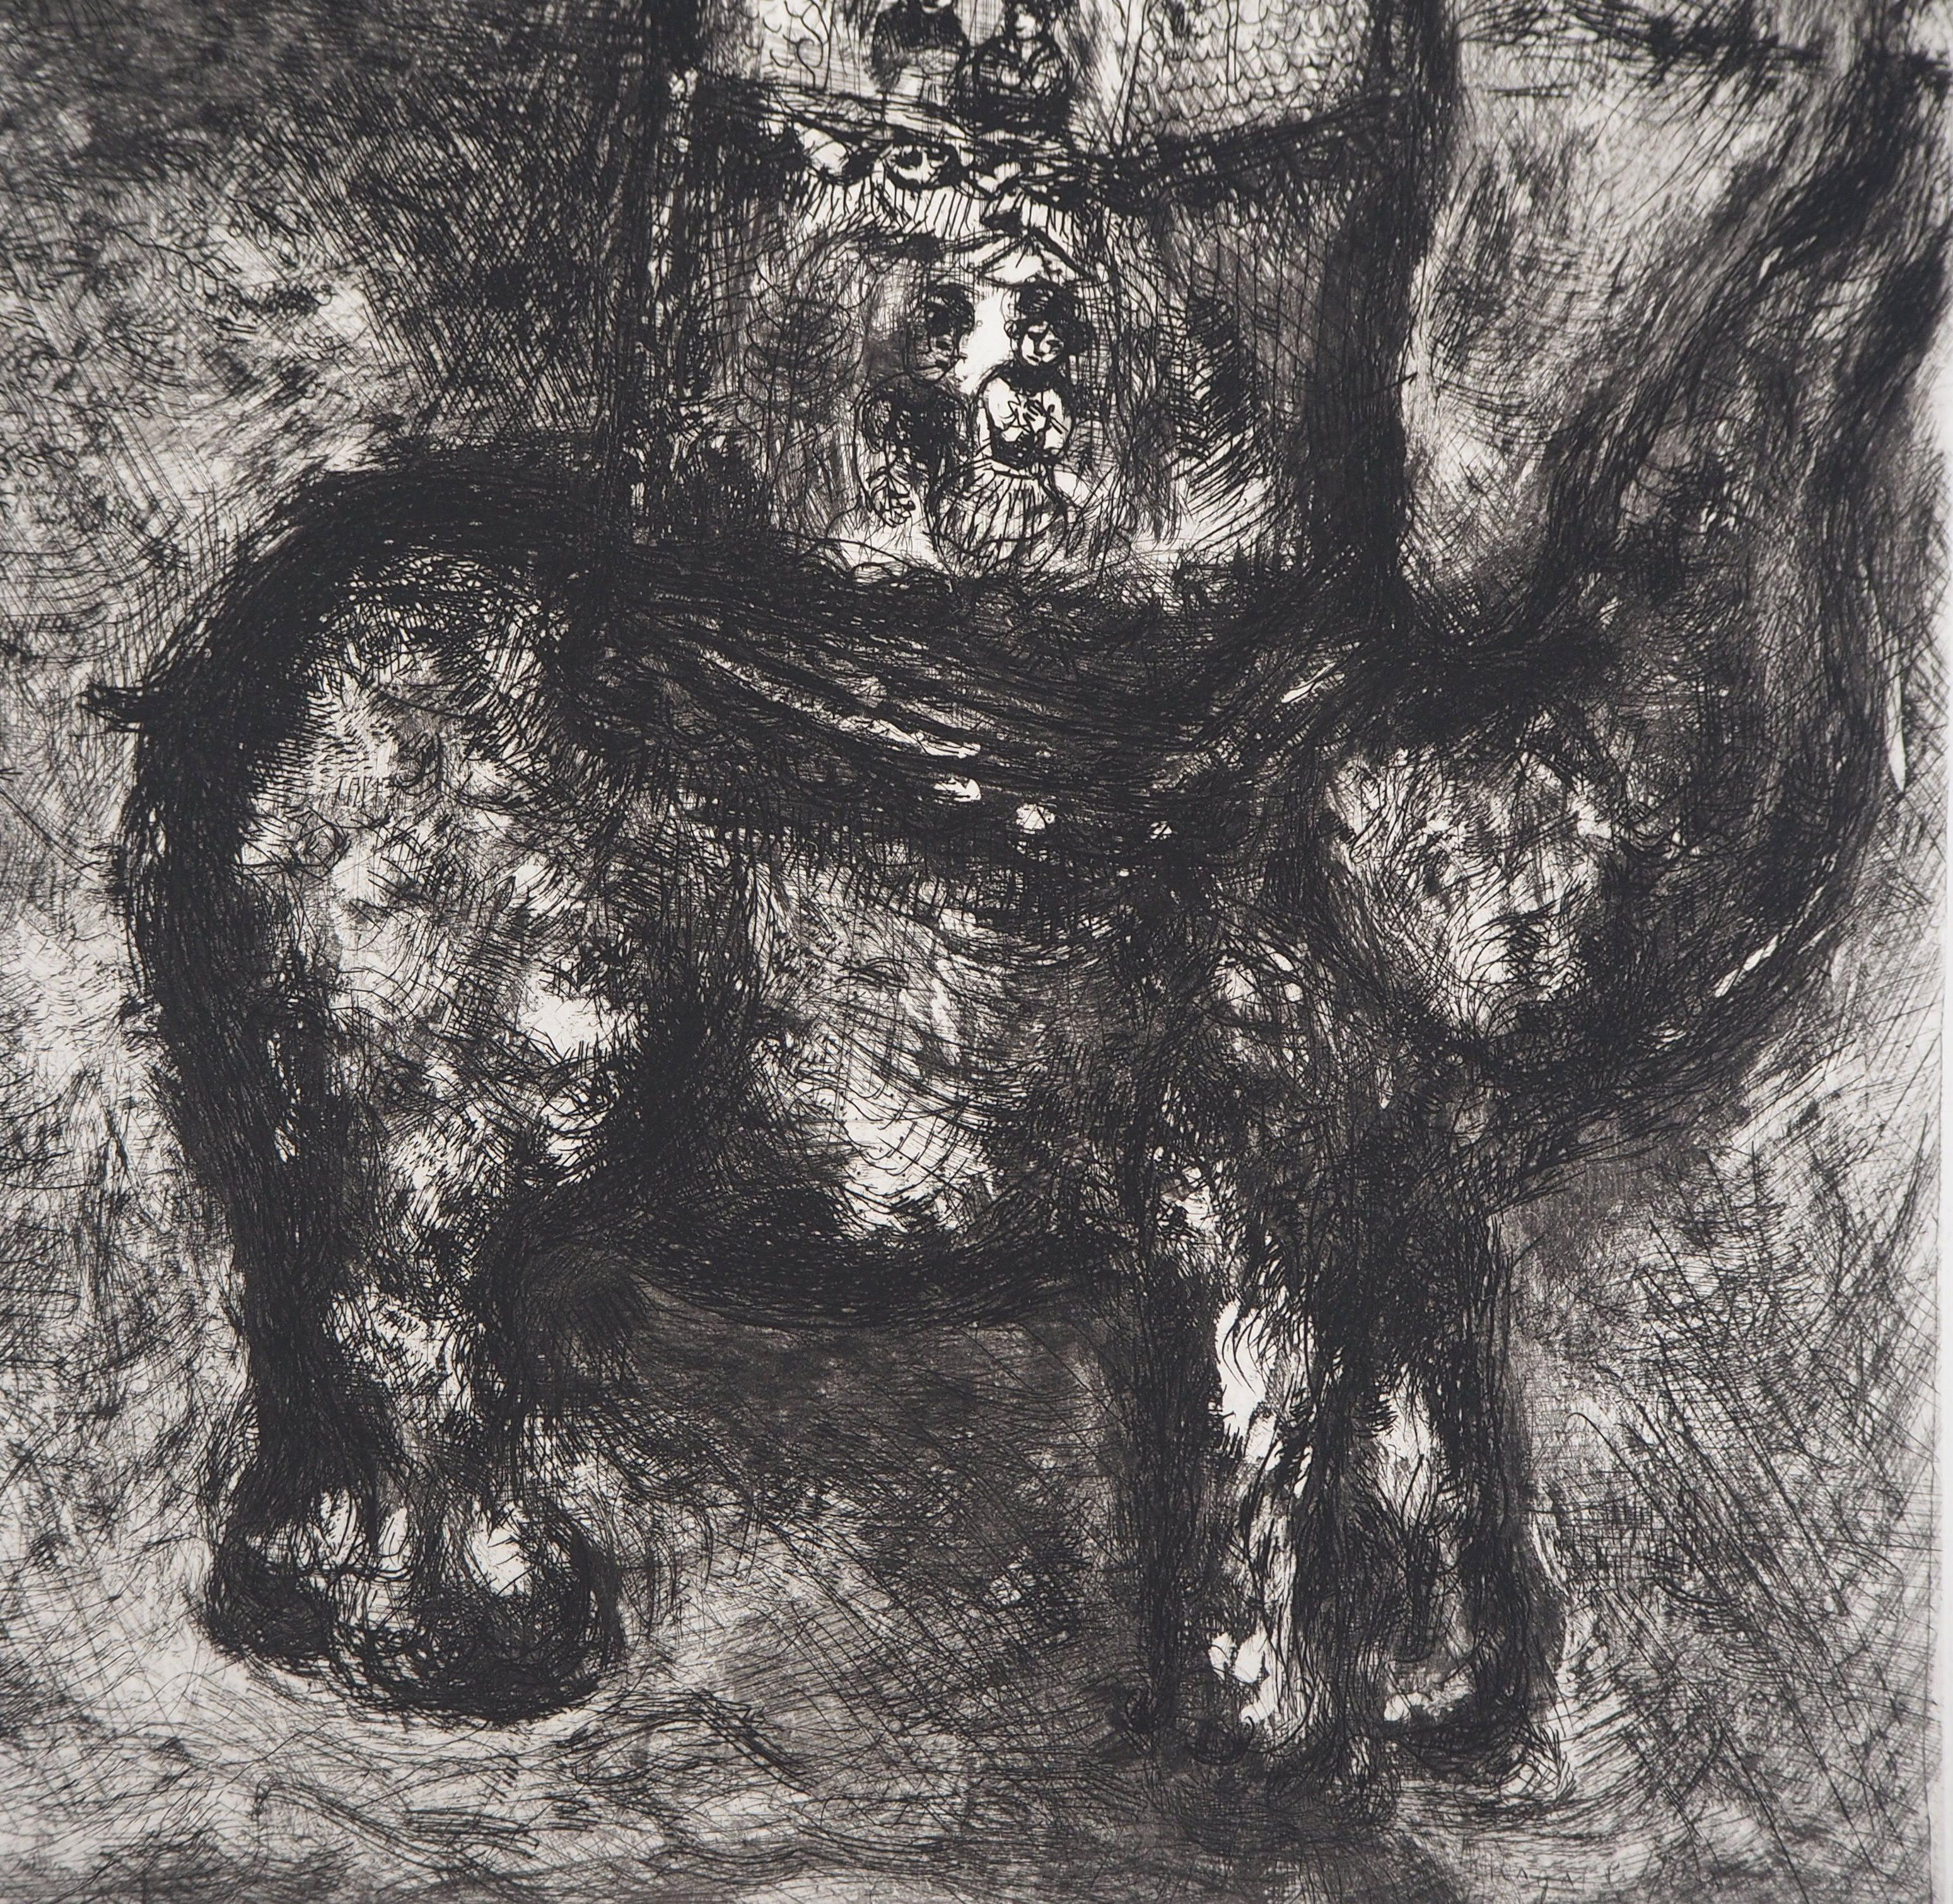 Marc Chagall
Fables : The Rat and the Elephant, 1952

Original etching
Printed signature in the plate
On Montval vellum 39 x 30 cm (c. 15.5 x 12 in)
With COA of the gallery and photocopy of the justification page of the set (see picture)

REFERENCES